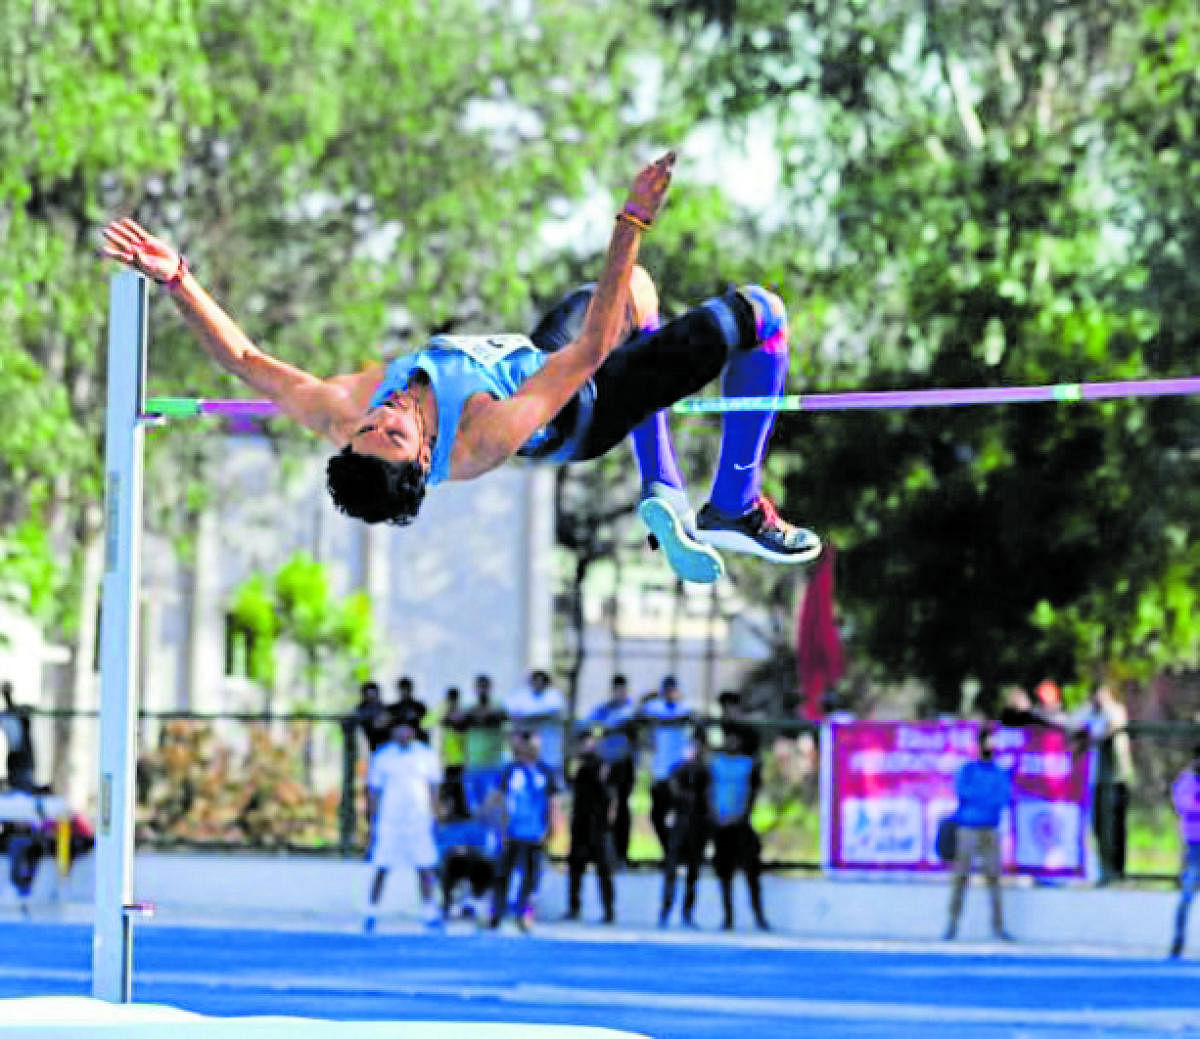 UP AND OVER: Tejaswin Shankar wins the high jump gold on the third day of the Federation Cup in Patiala on Wednesday.